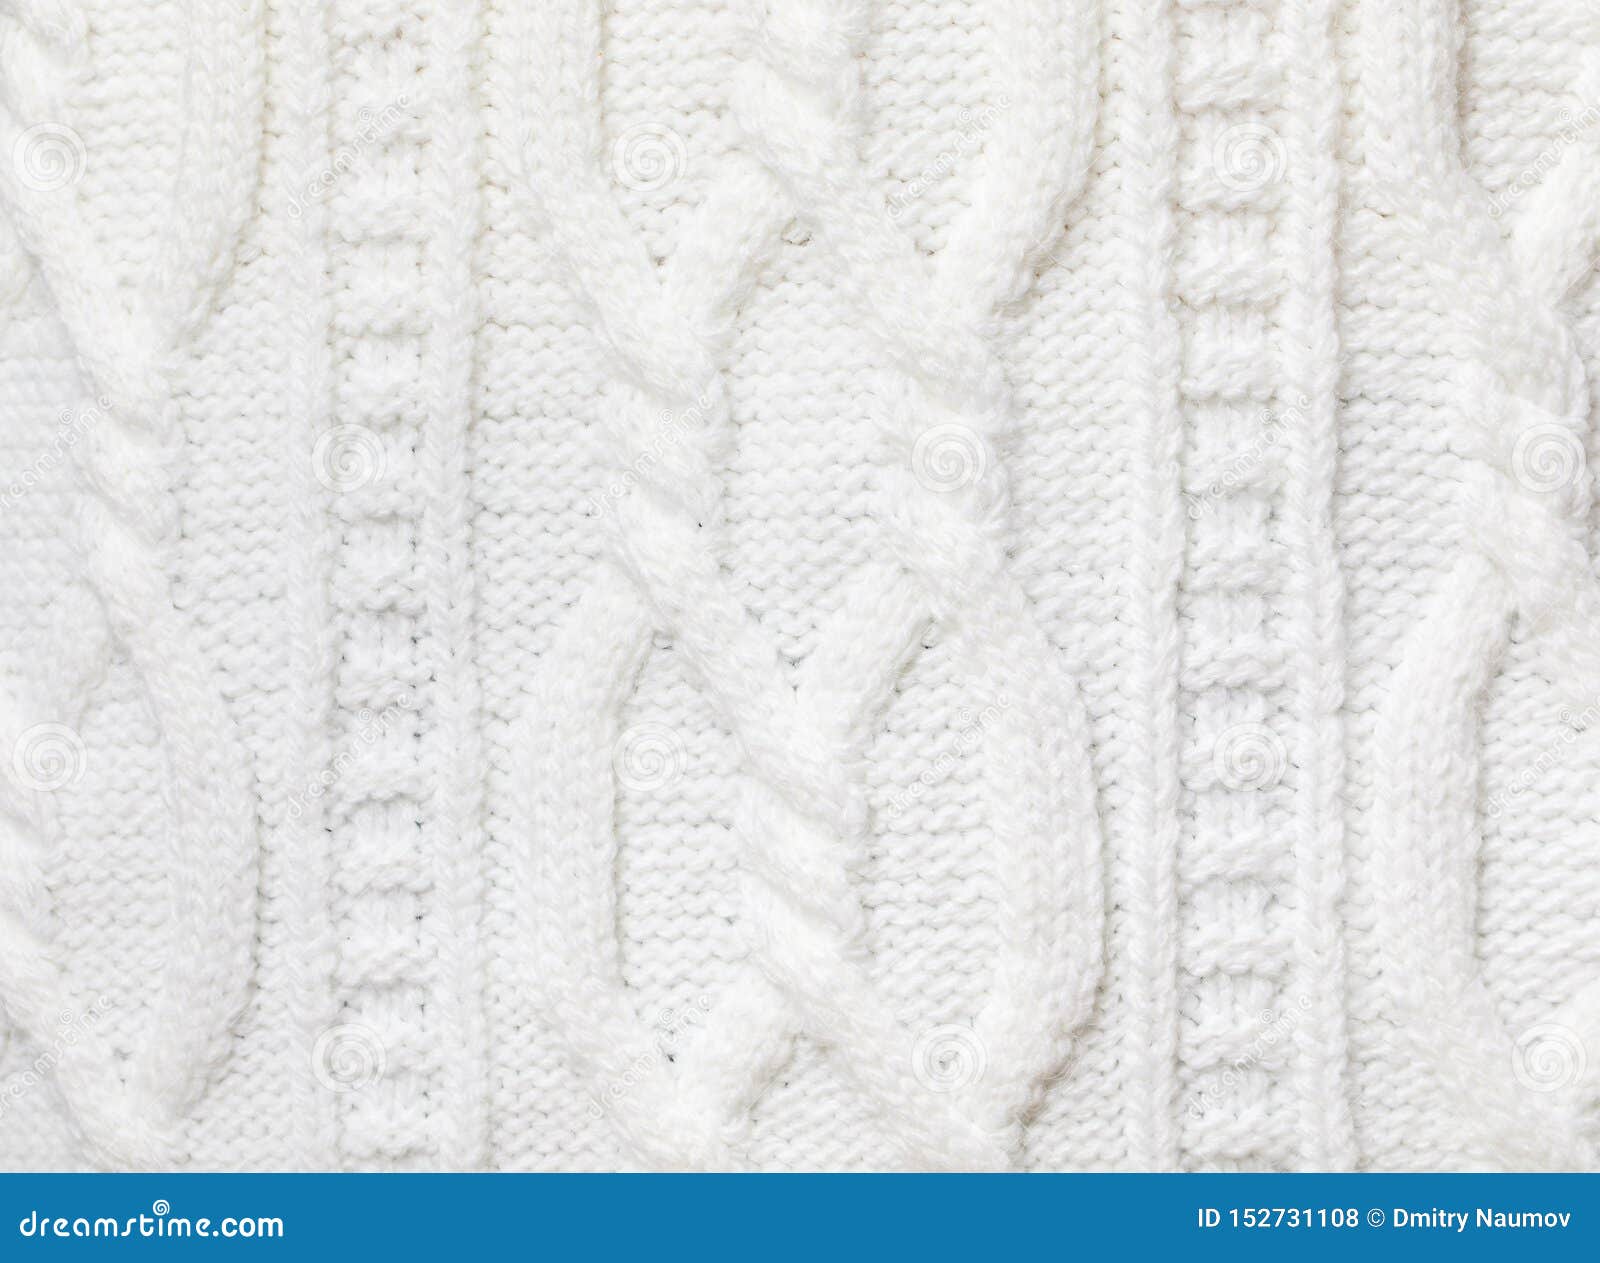 White Cable Knitting Fabric Textured Background Stock Photo - Image of  ornament, cloth: 152731108